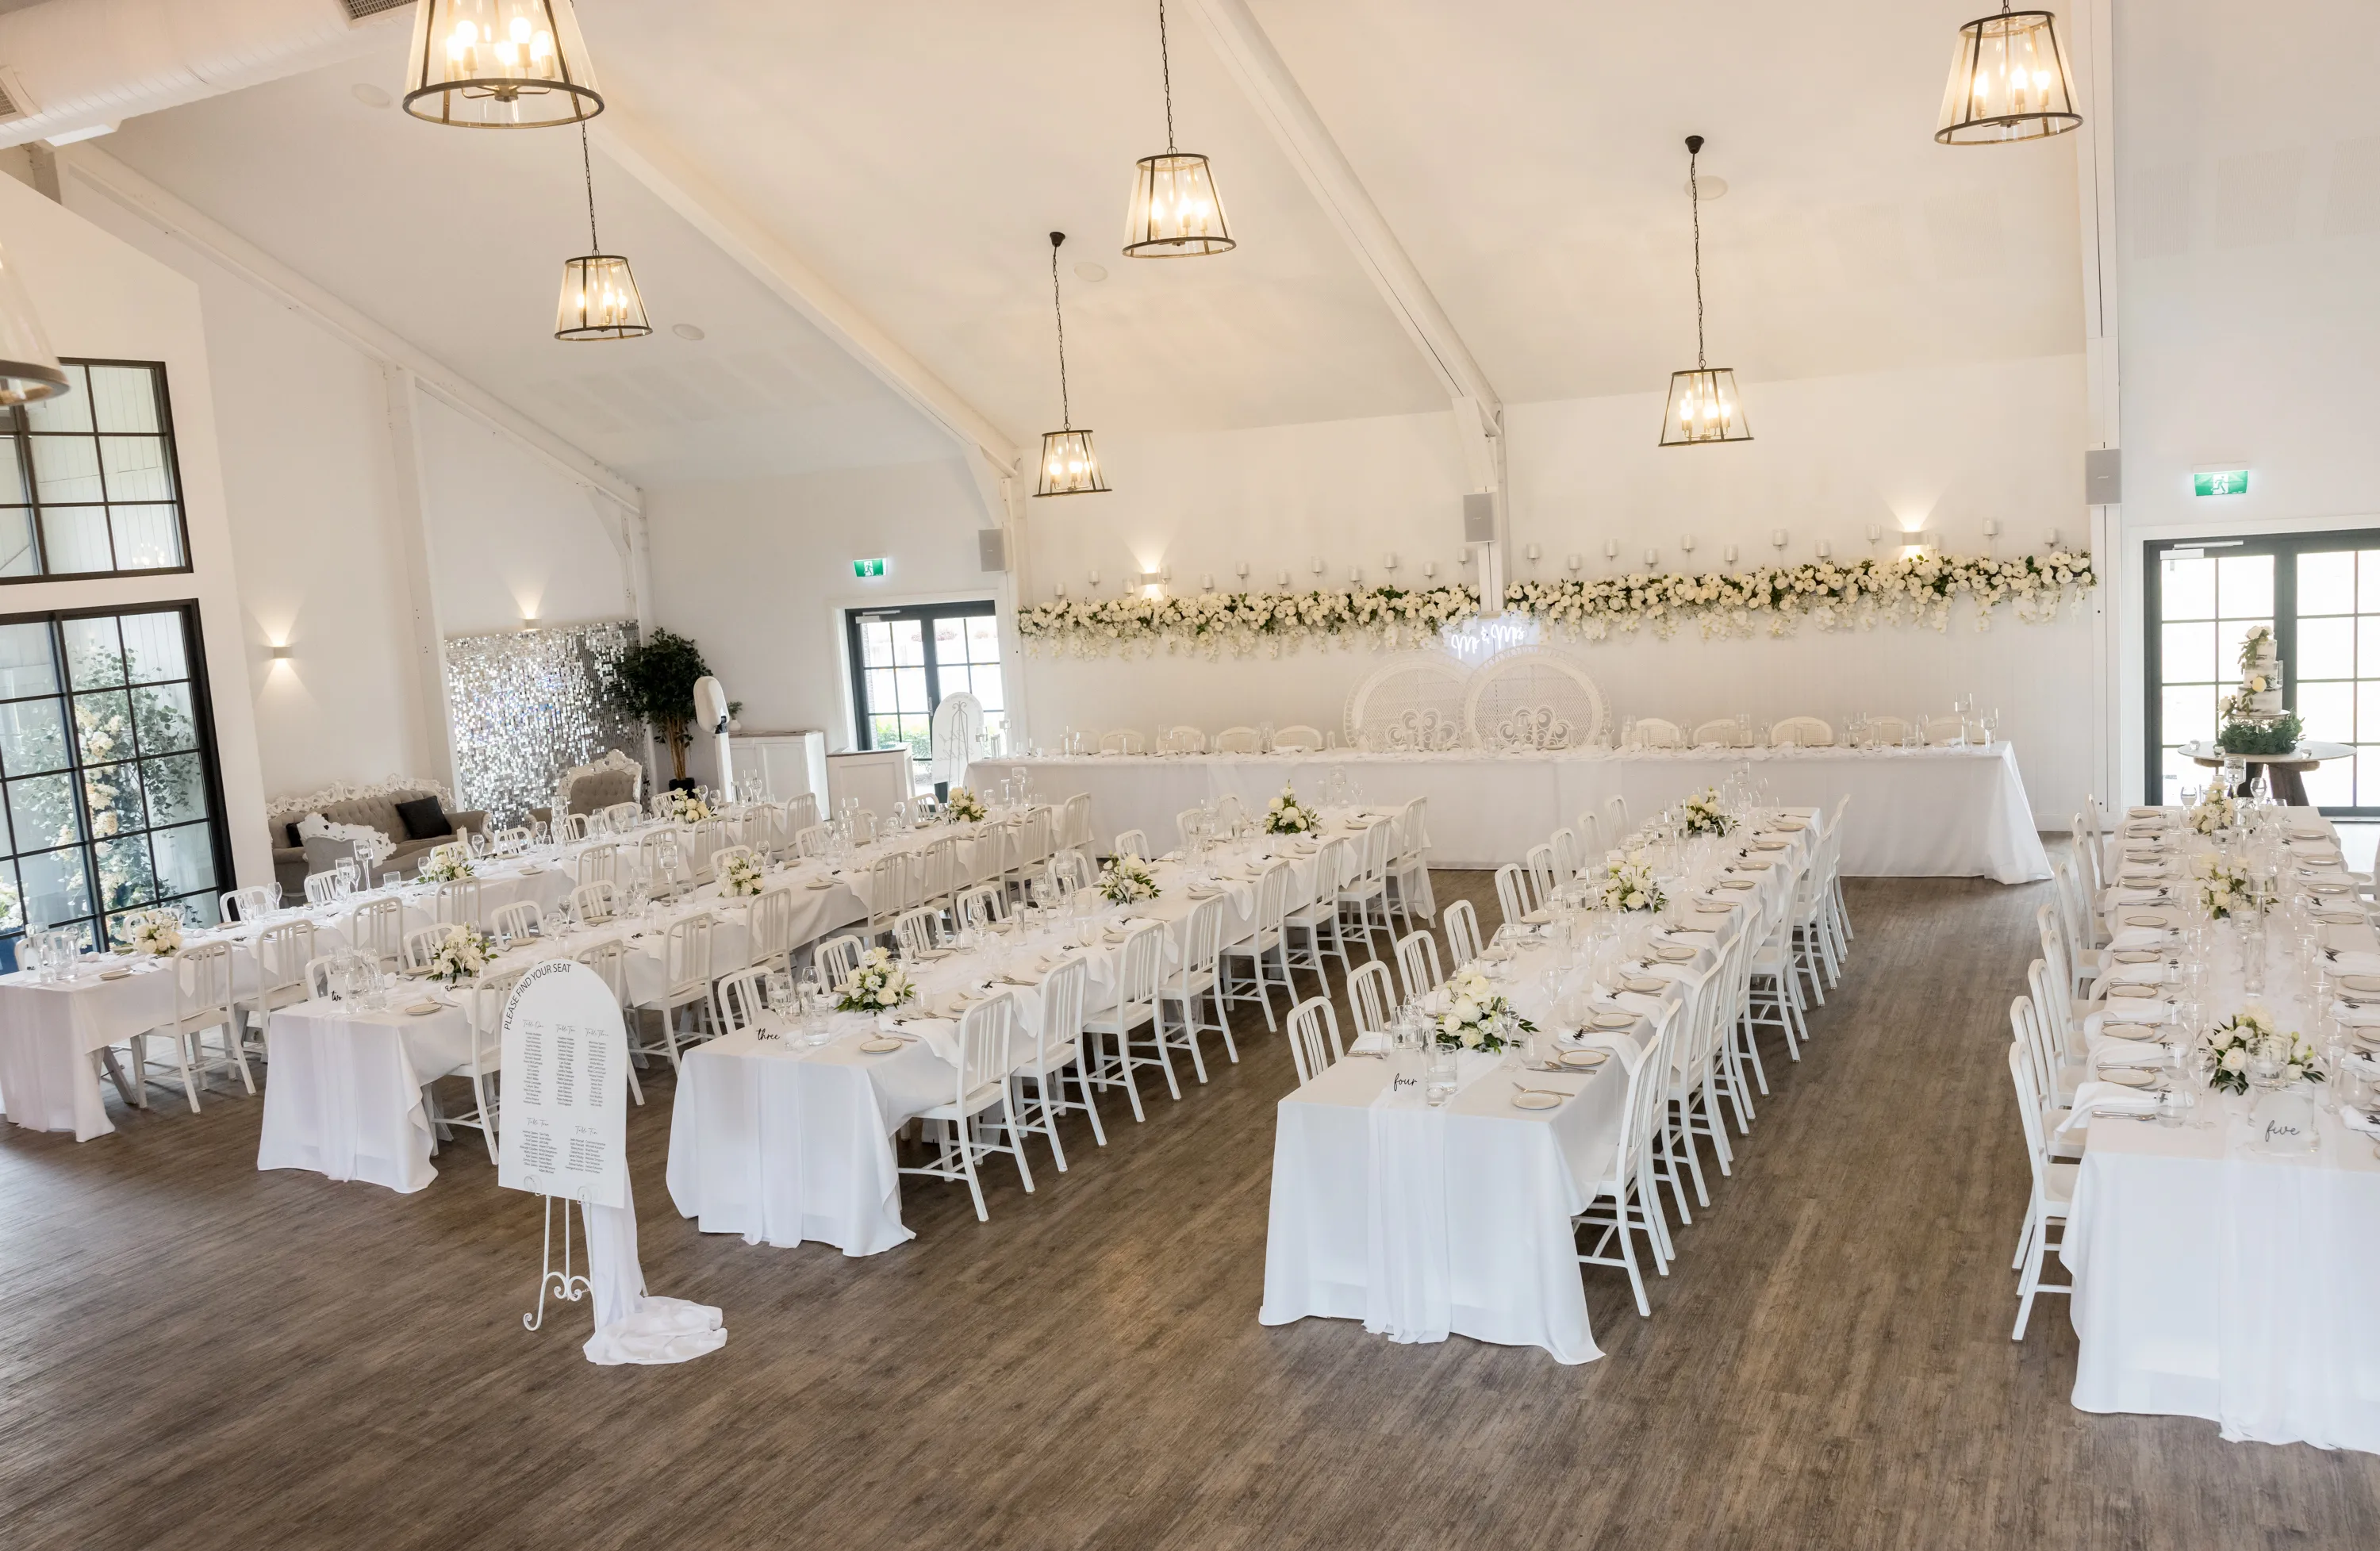 Interior image of the White Barn Pokolbin featuring tables, chairs and florals